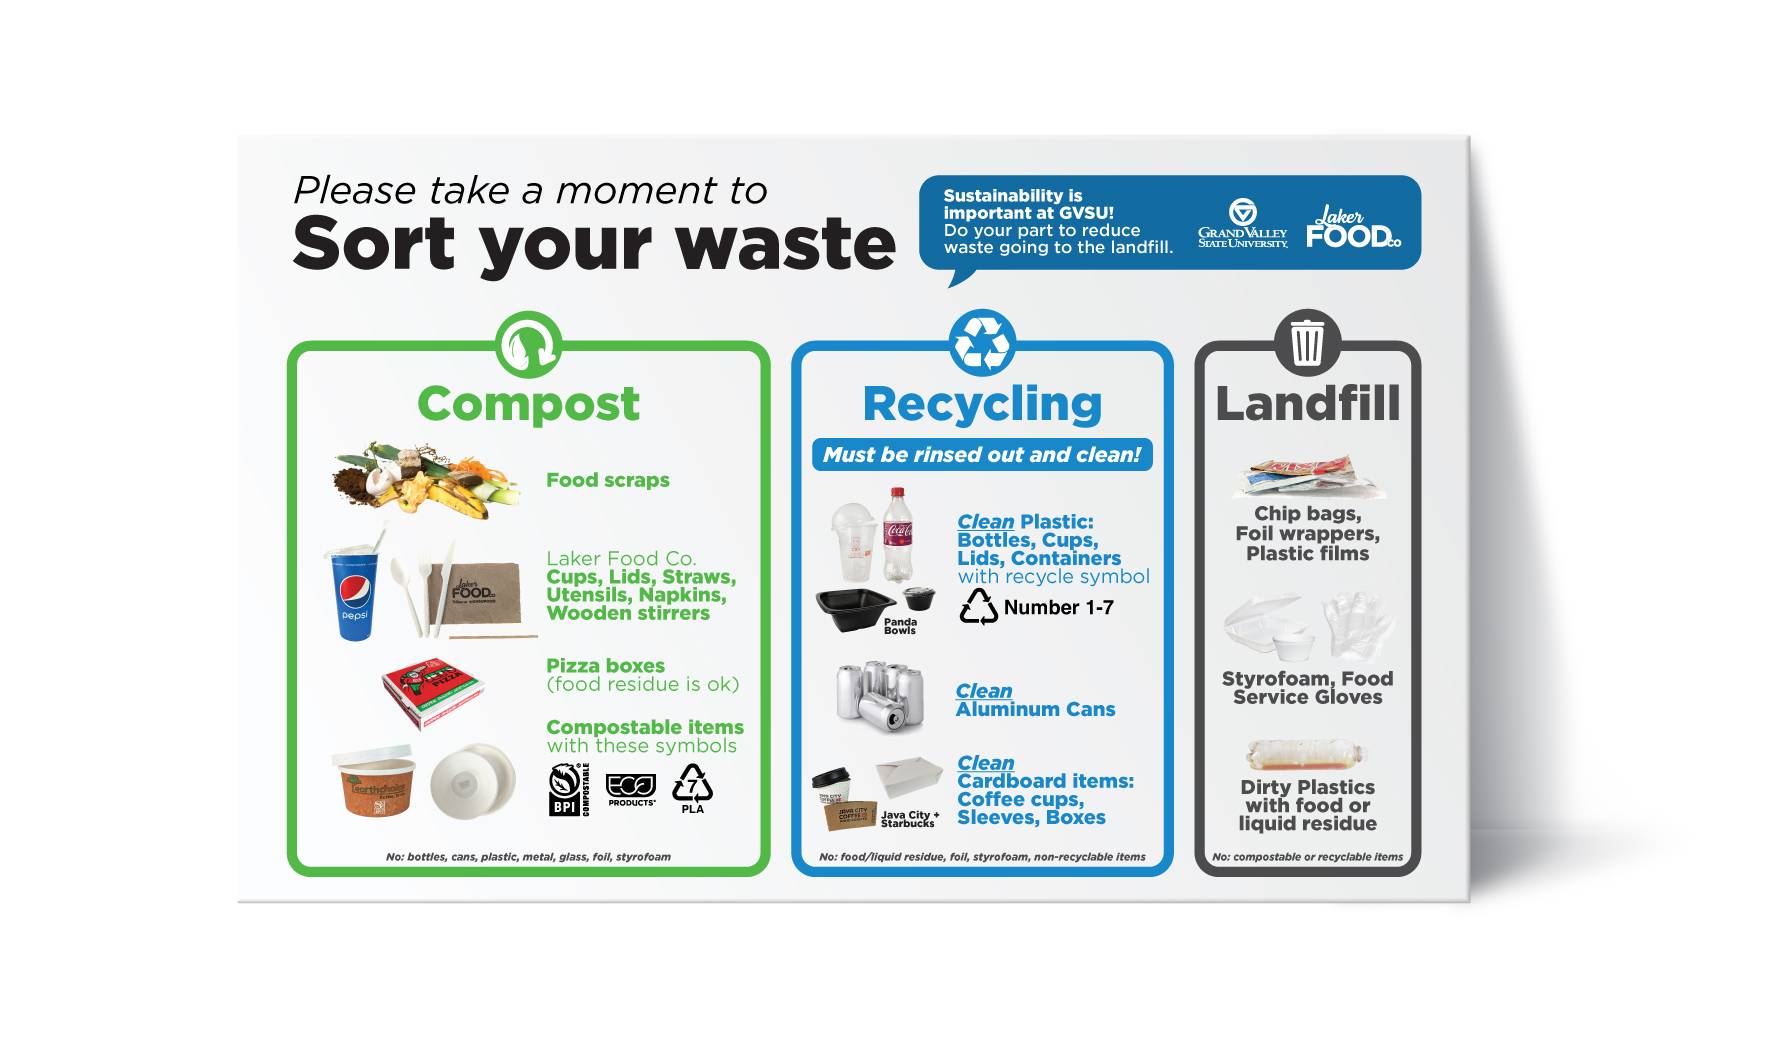 Poster showing the 3 waste categories (Compost, Recycling, Landfill) and which items belong in each category, also listed below